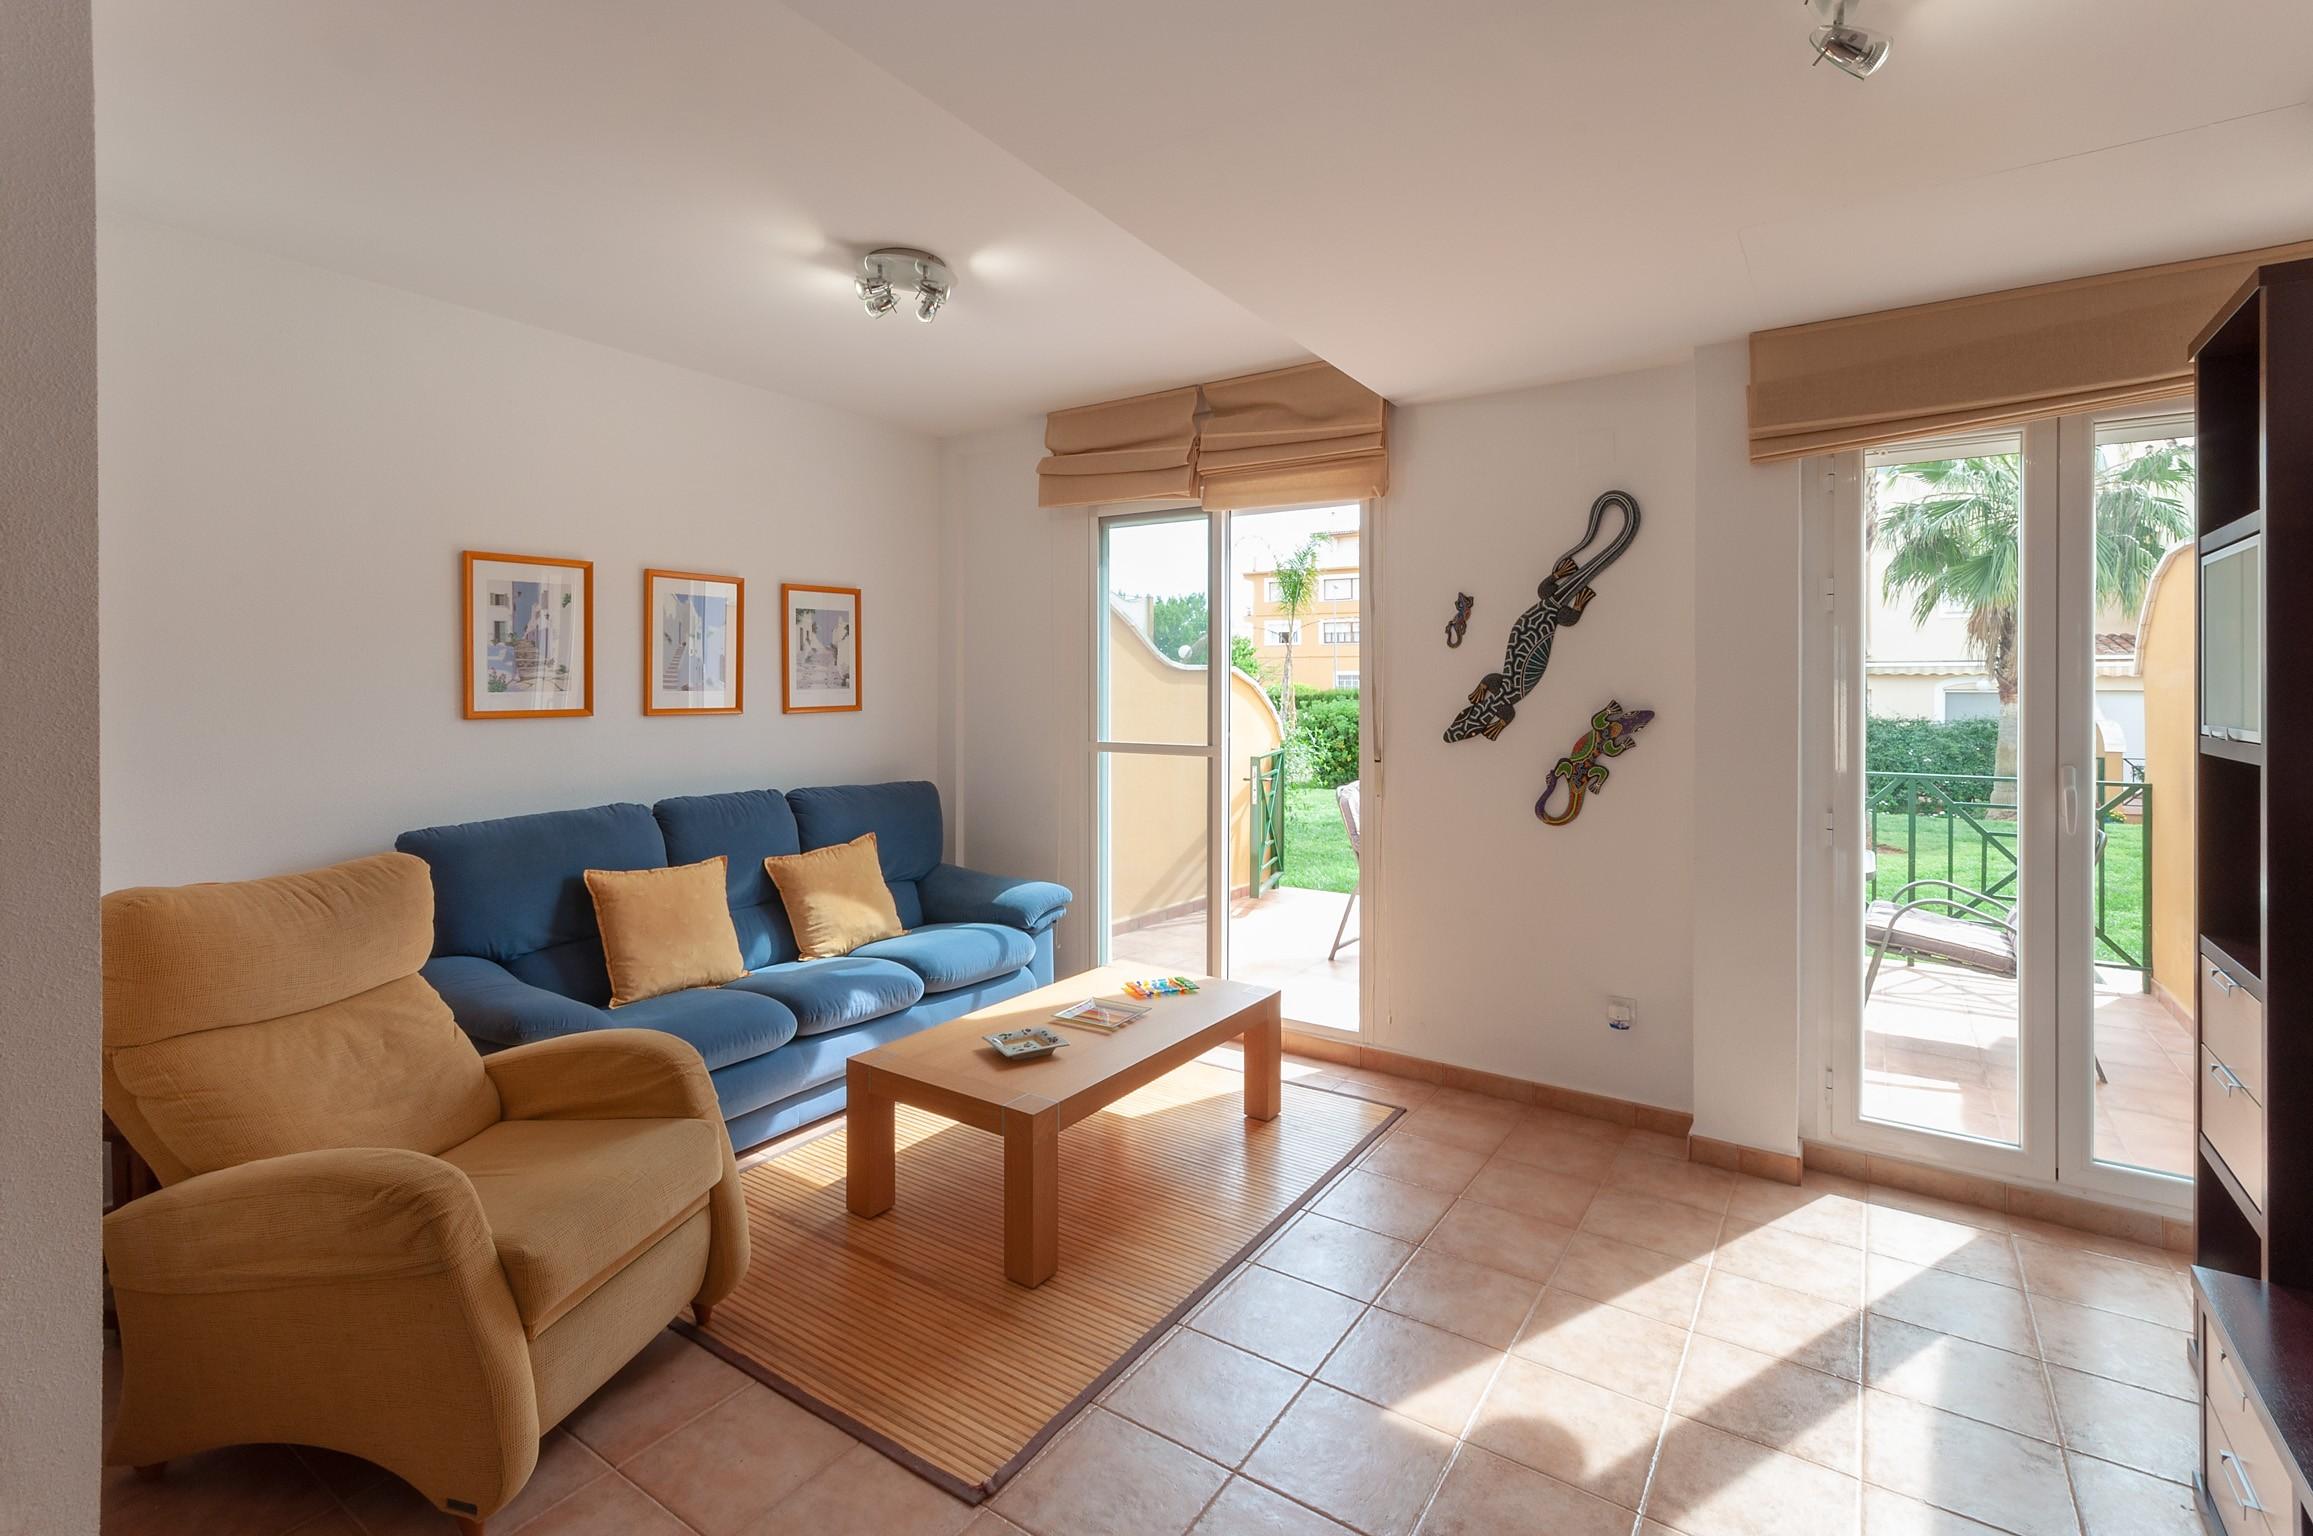 Property Image 2 - VILLAS DEL MONTGÓ - Fantastic apartment with shared pool and only 2 km from the sea in Denia. Free WiFi